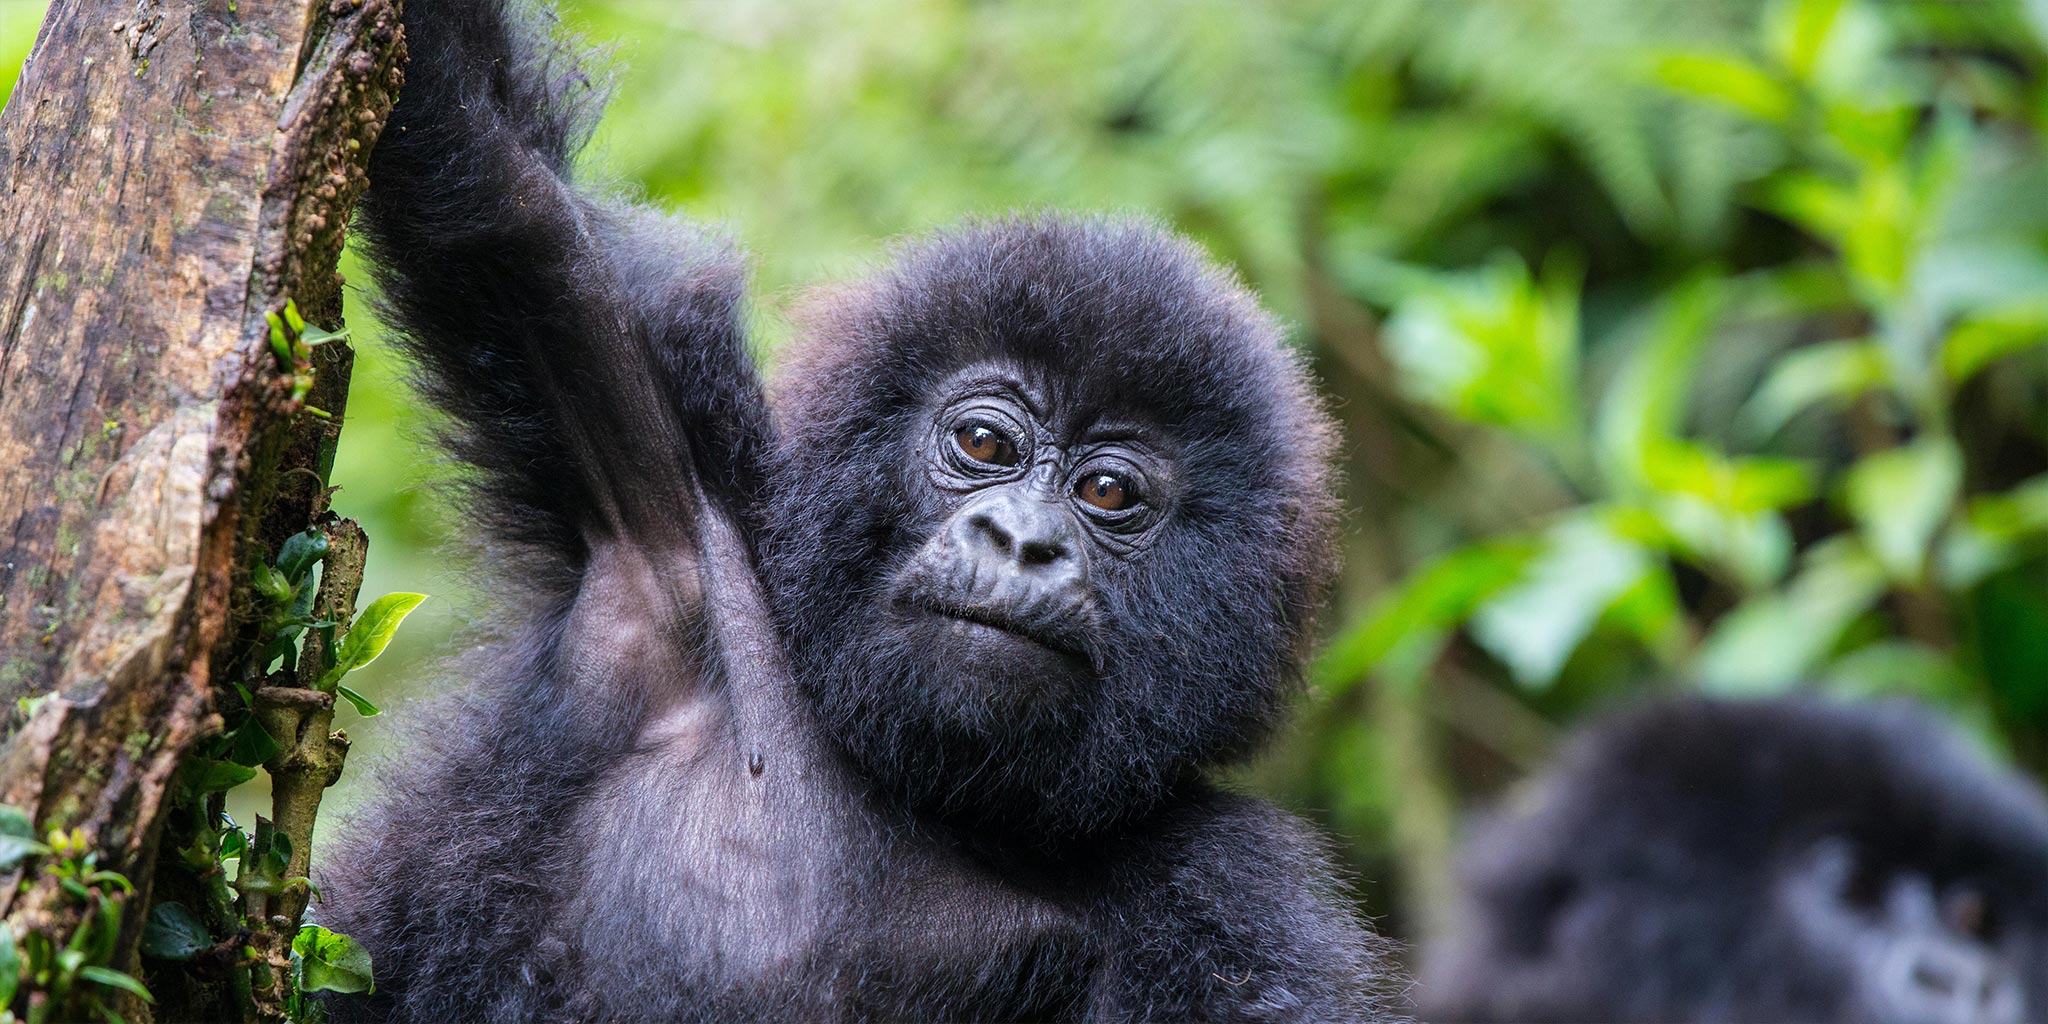 01-baby-mountain-gorilla-hanging-off-a-tree-branch-and-being-playful-in-the-jungle-of-rwanda.jpg